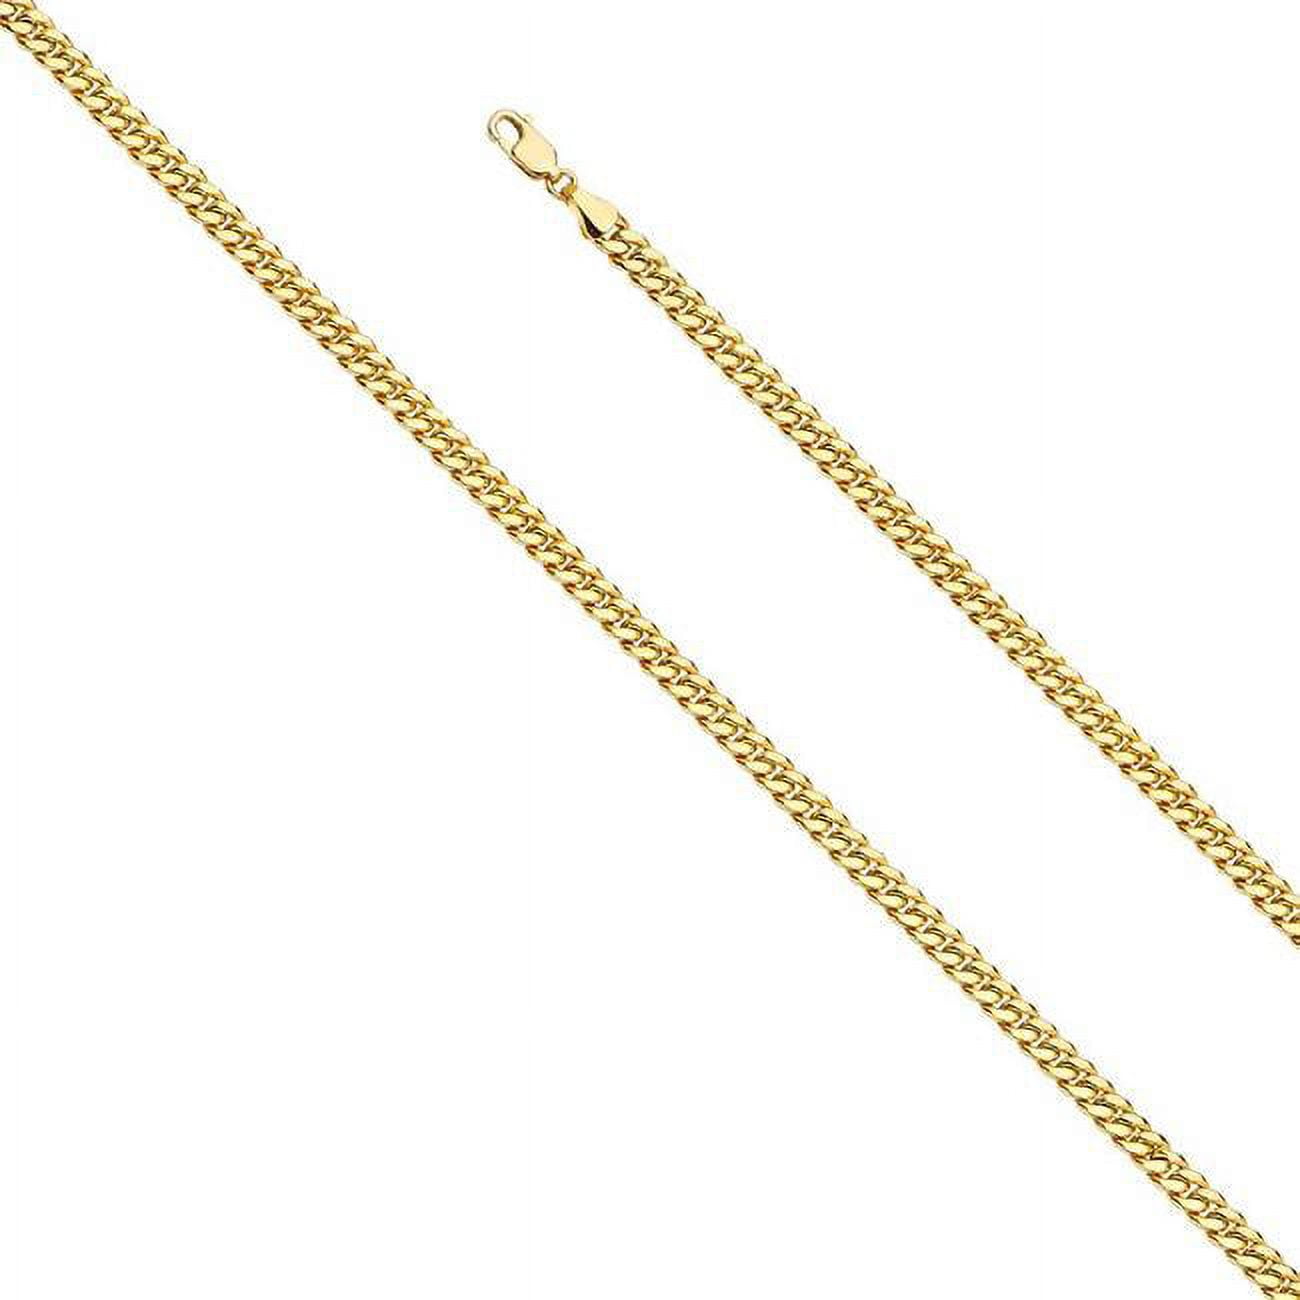 Ch-0542-075 7.5 In. 14k Yellow Gold 4.5 Mm Hollow Miami Cuban Chain